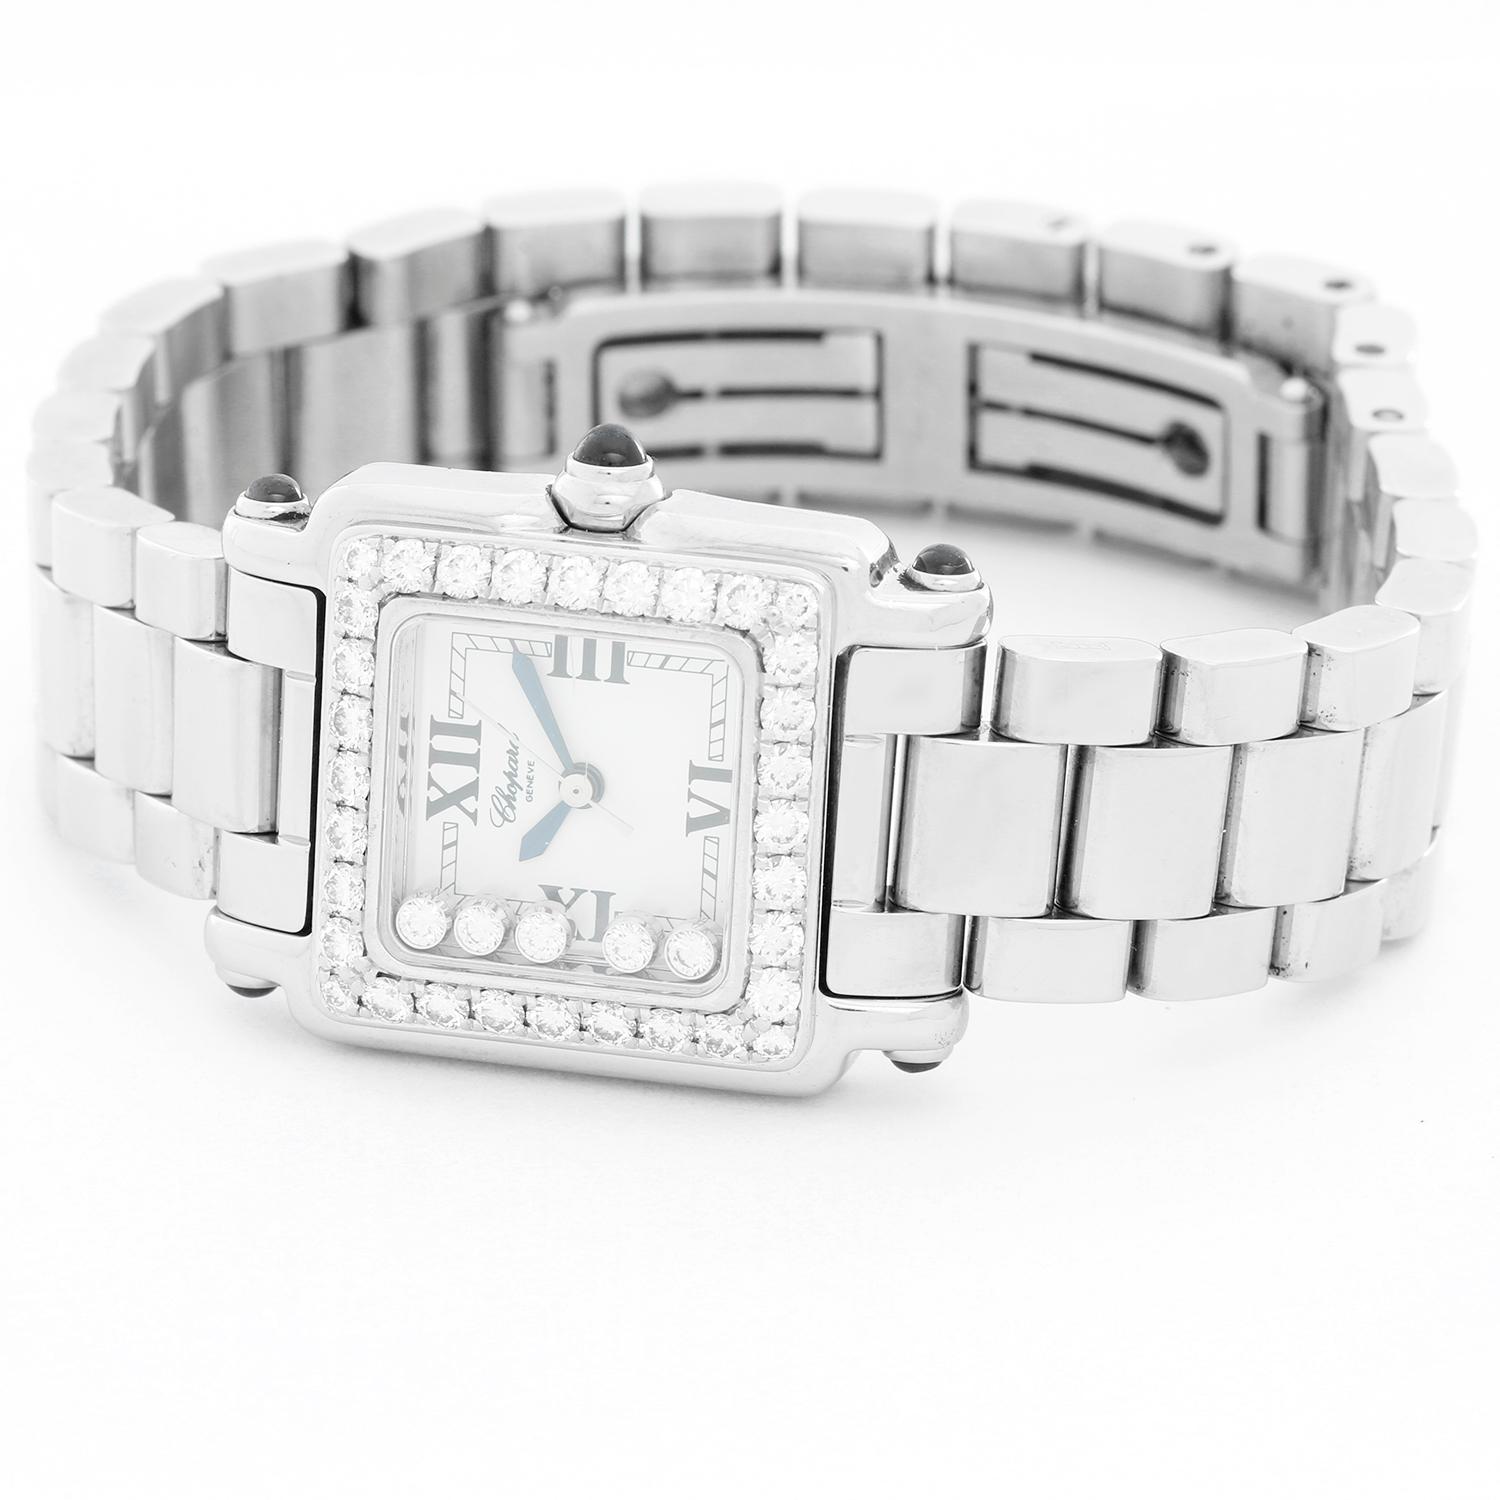 Chopard Happy Sport Ladies 5 Floating Diamonds Stainless Steel Watch 27/8894-23/11 - Quartz. Stainless steel with diamond set white gold bezel  (28mm x 31mm). White dial with black Roman numerals and 5 floating diamonds. Stainless steel bracelet.